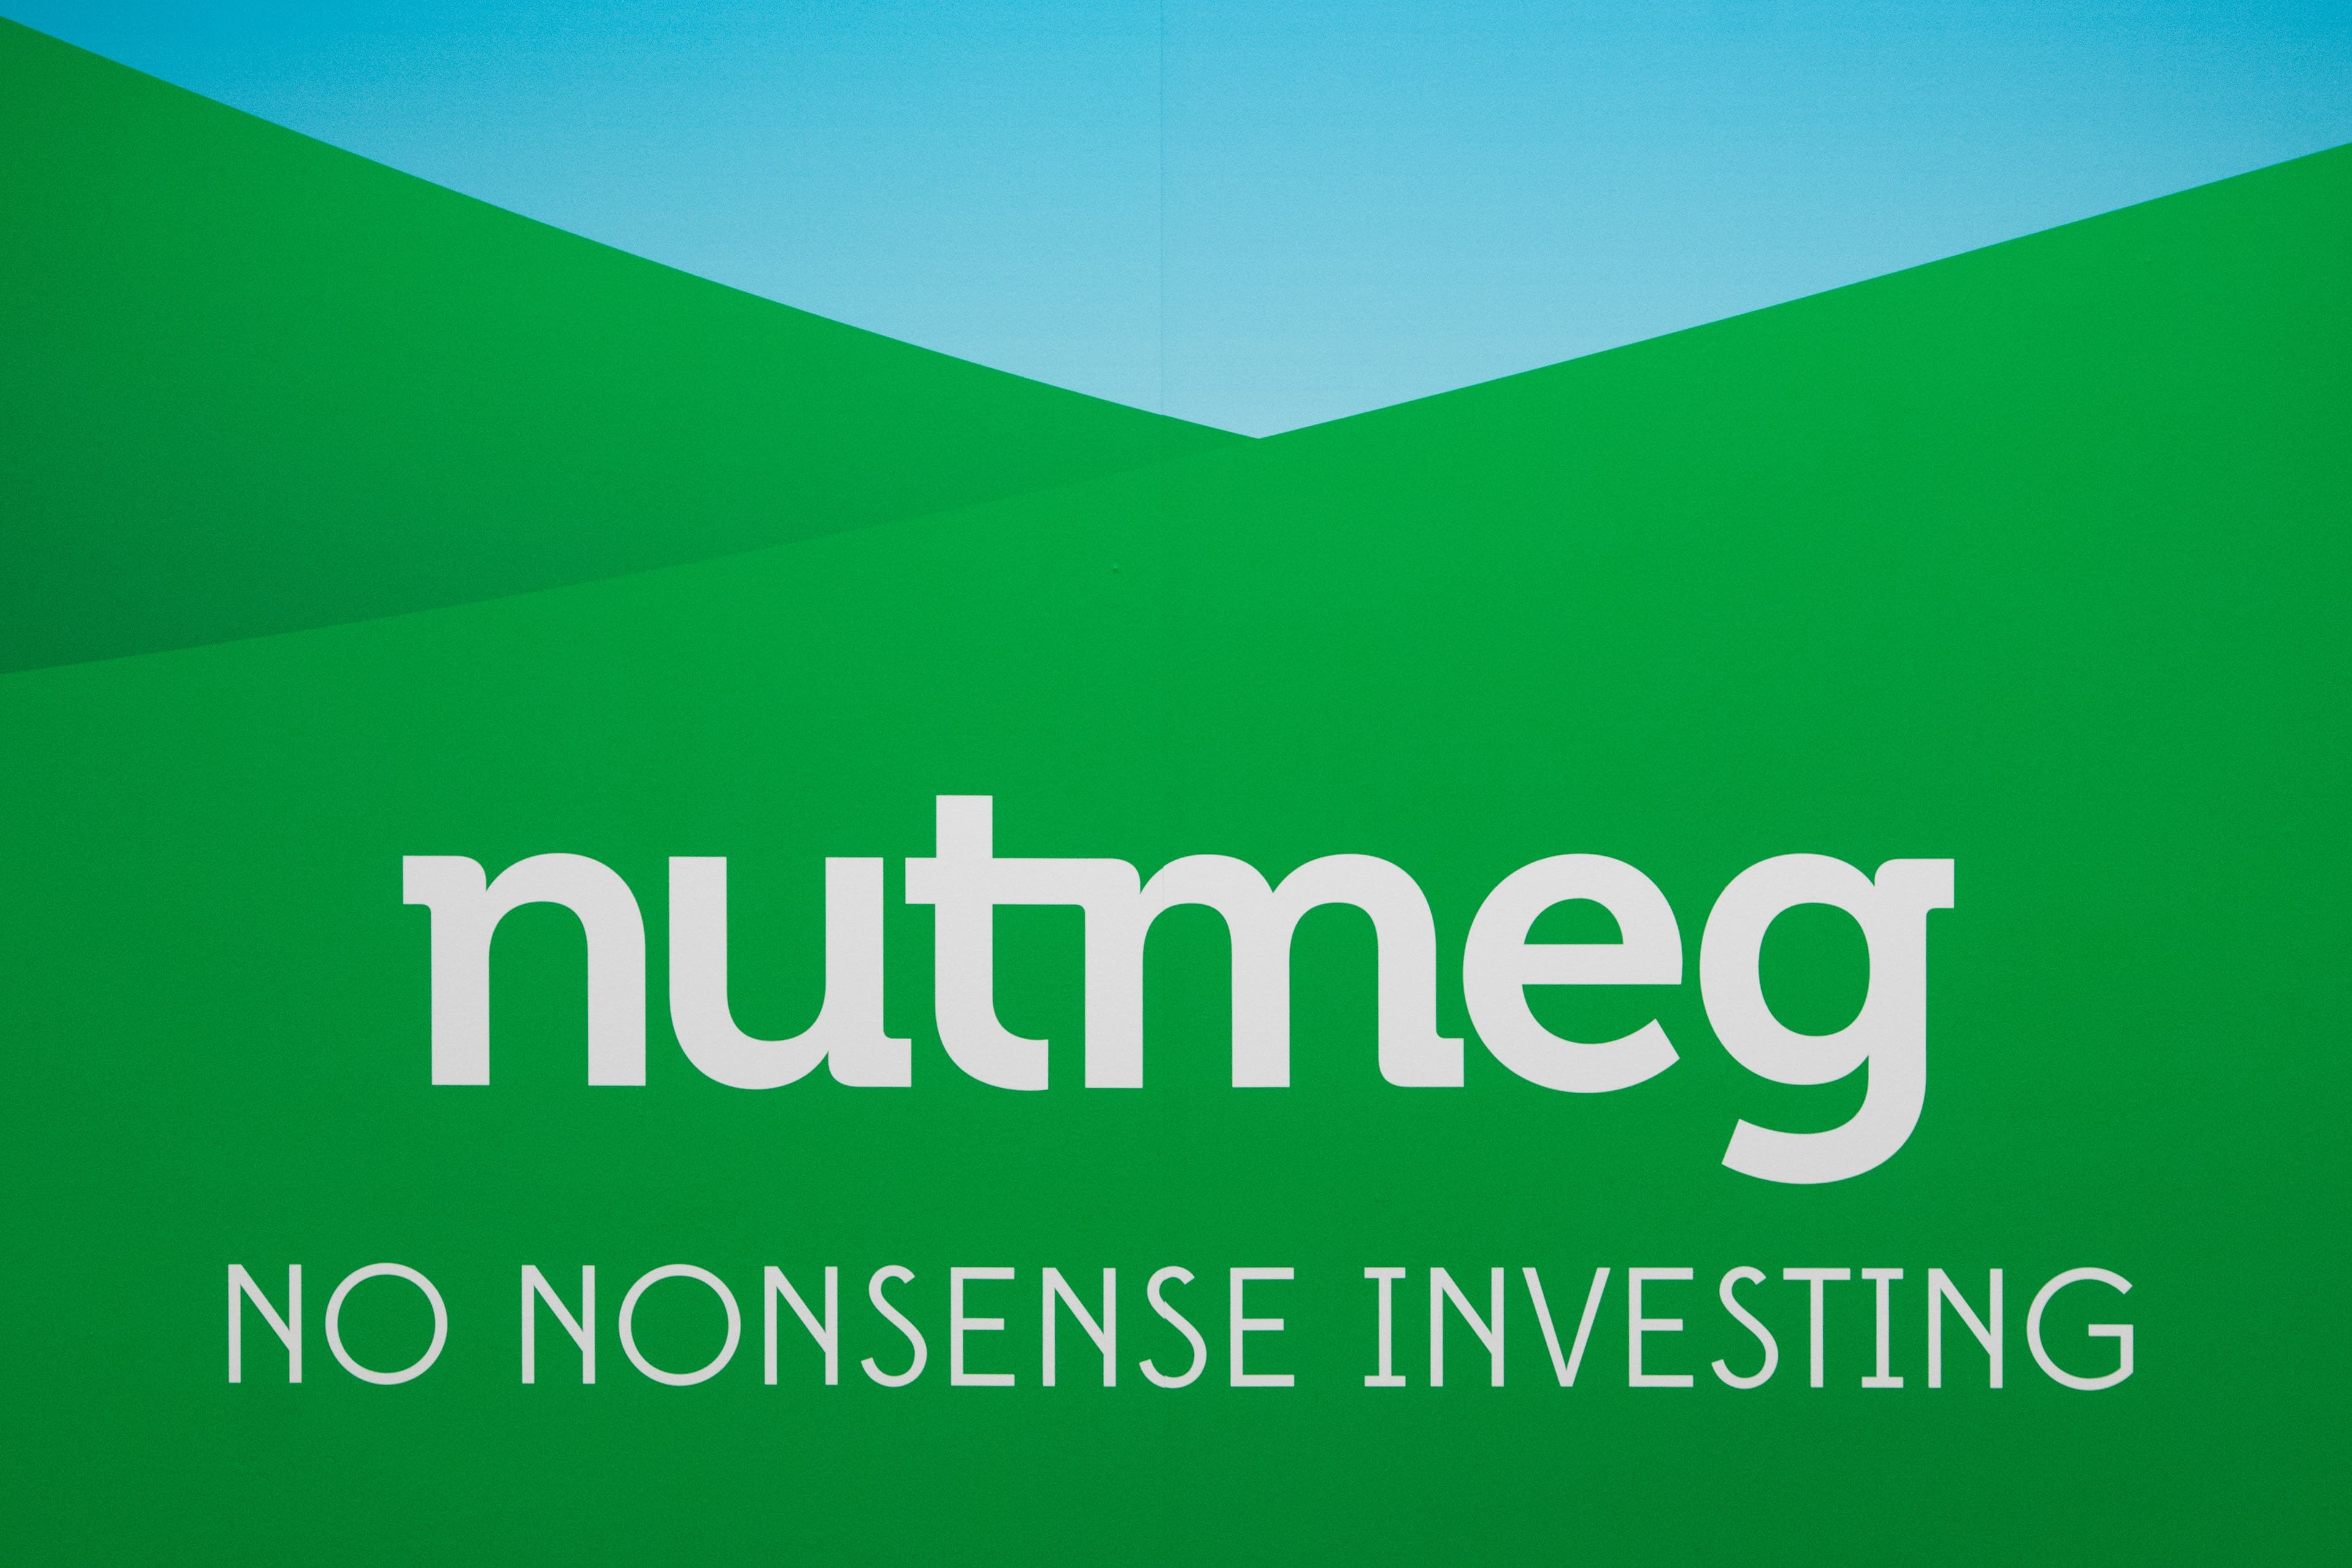 Nick Hungerford stepped down as chief executive of Nutmeg in 2016 (Dominic Lipinski/PA)